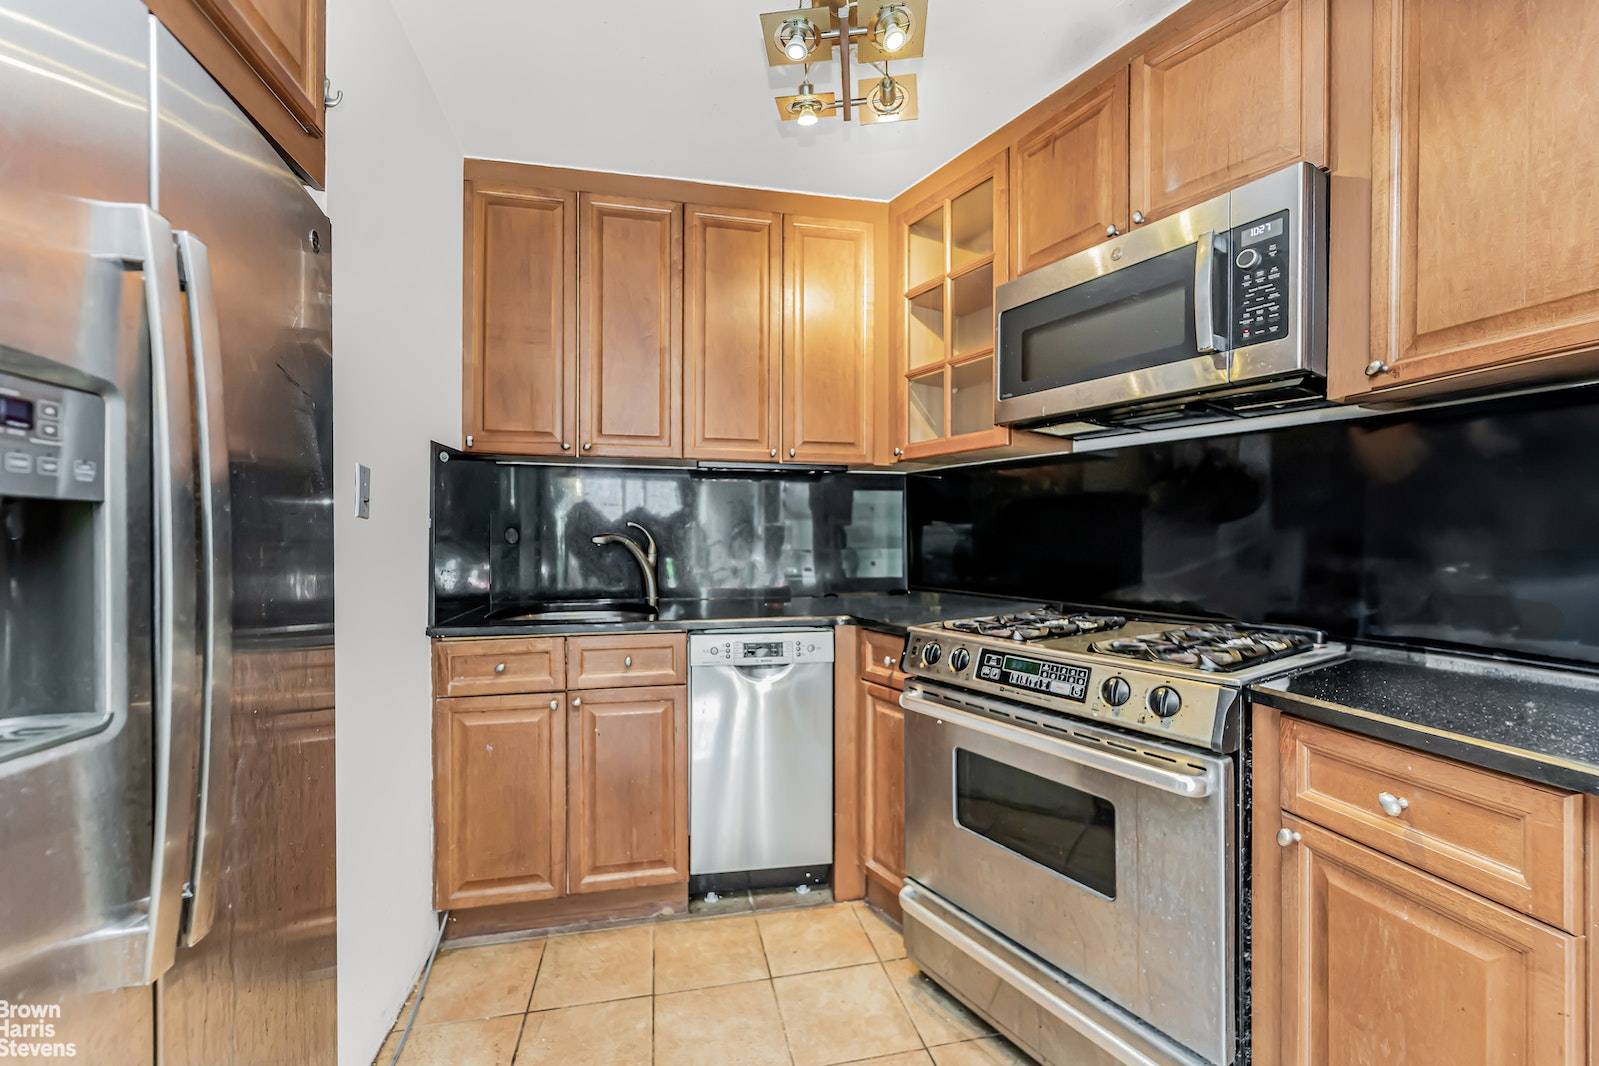 2 BED, 2 BATH CONDO WITH BALCONY amp ; RIVERVIEW ROOFDECKThis sunny apartment offers a spacious open floor concept with an open kitchen including granite countertops, stainless steel appliances and ...